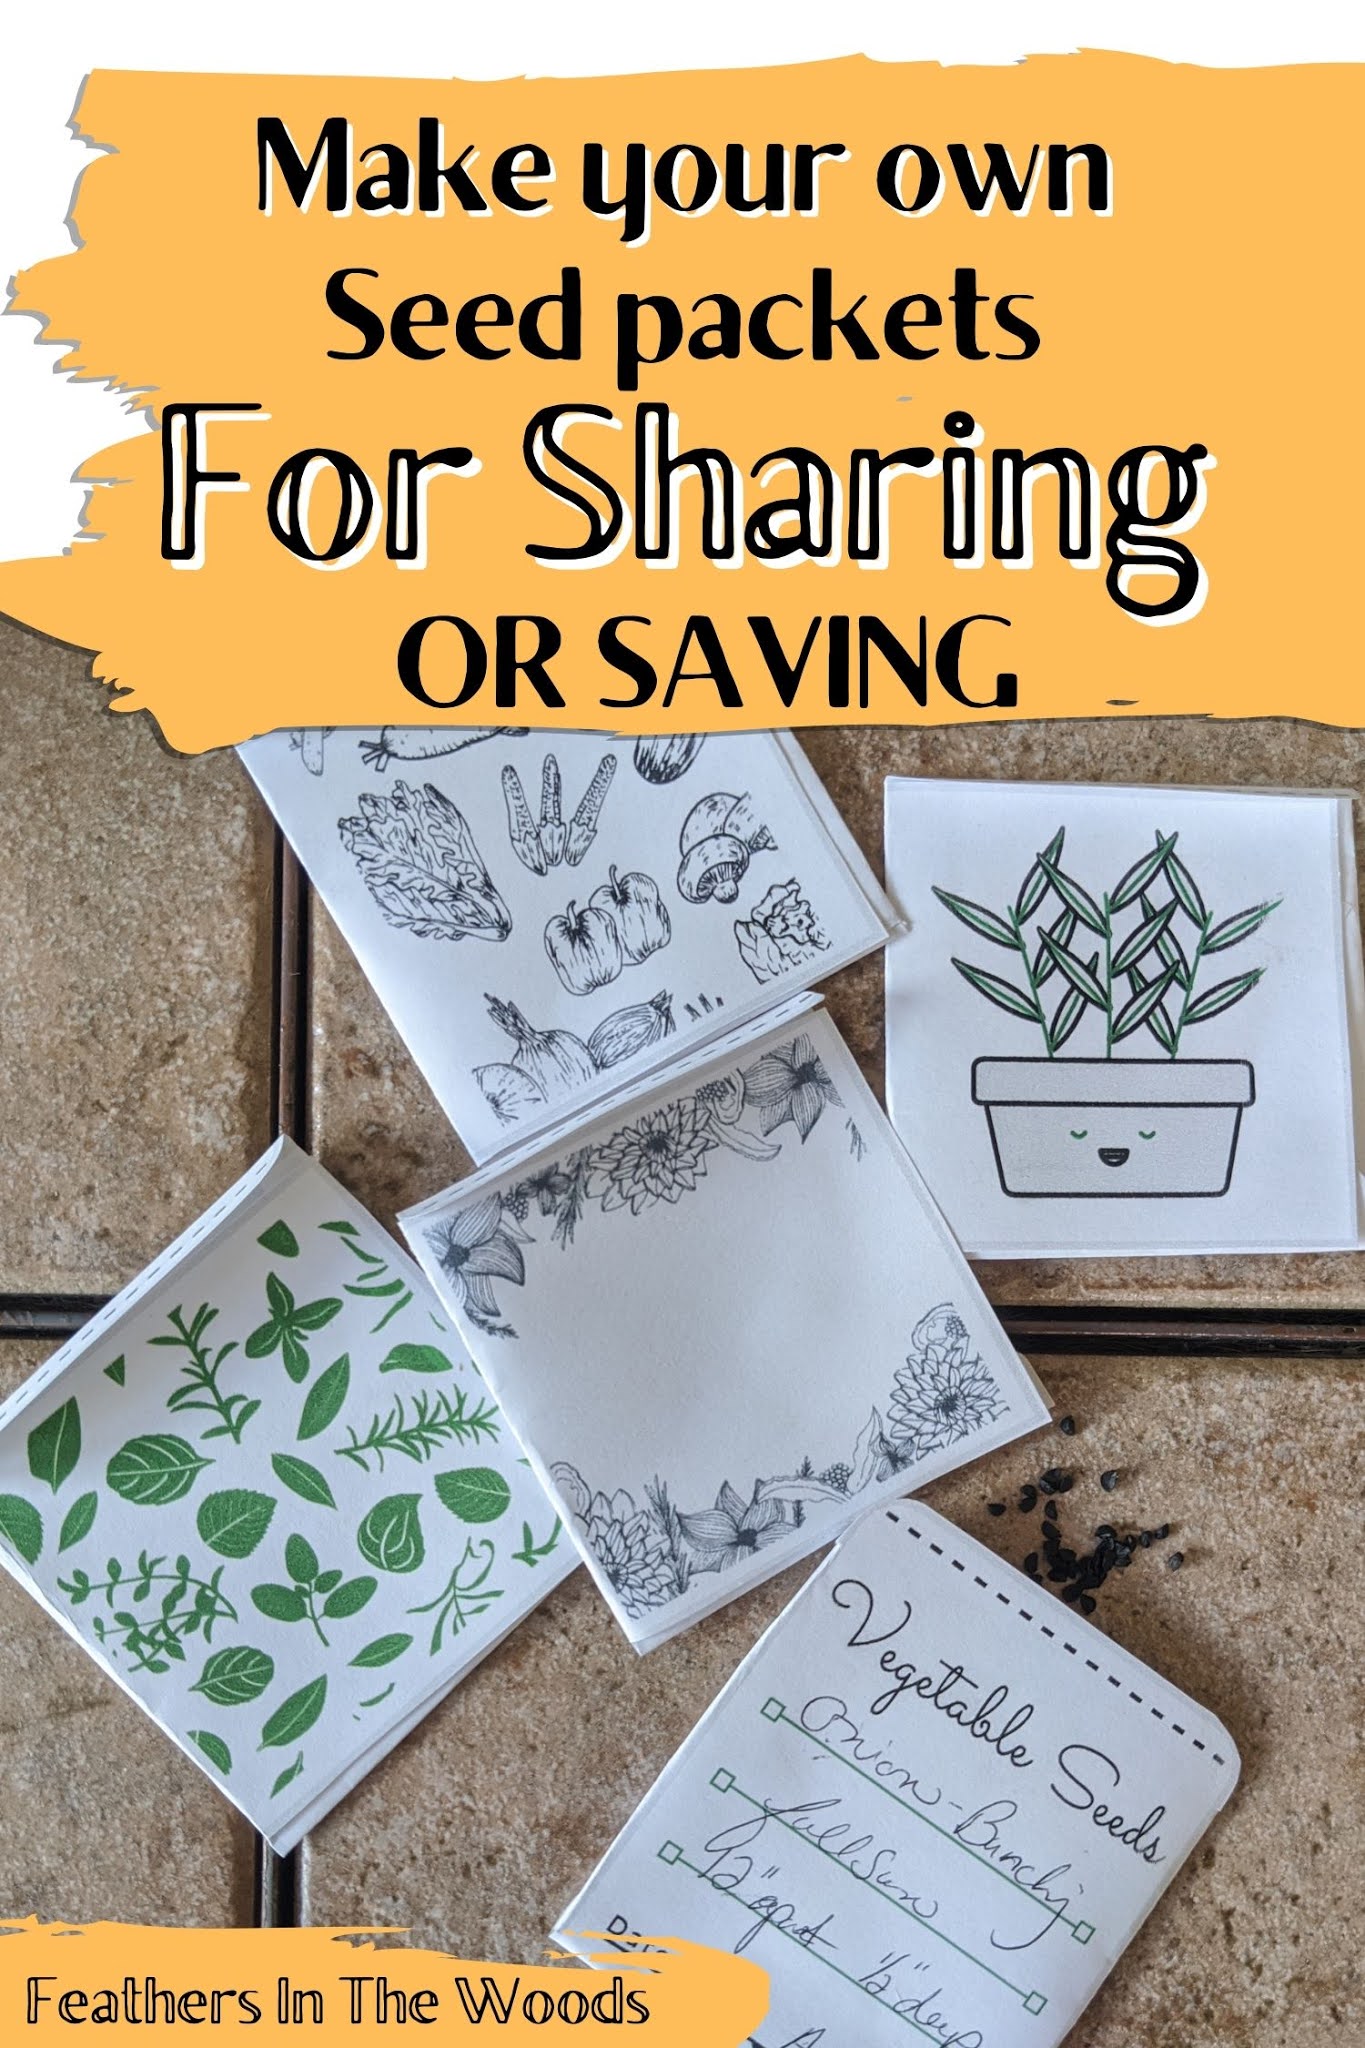 How to Make a Plant Seed Storage Box + Free Printable Dividers